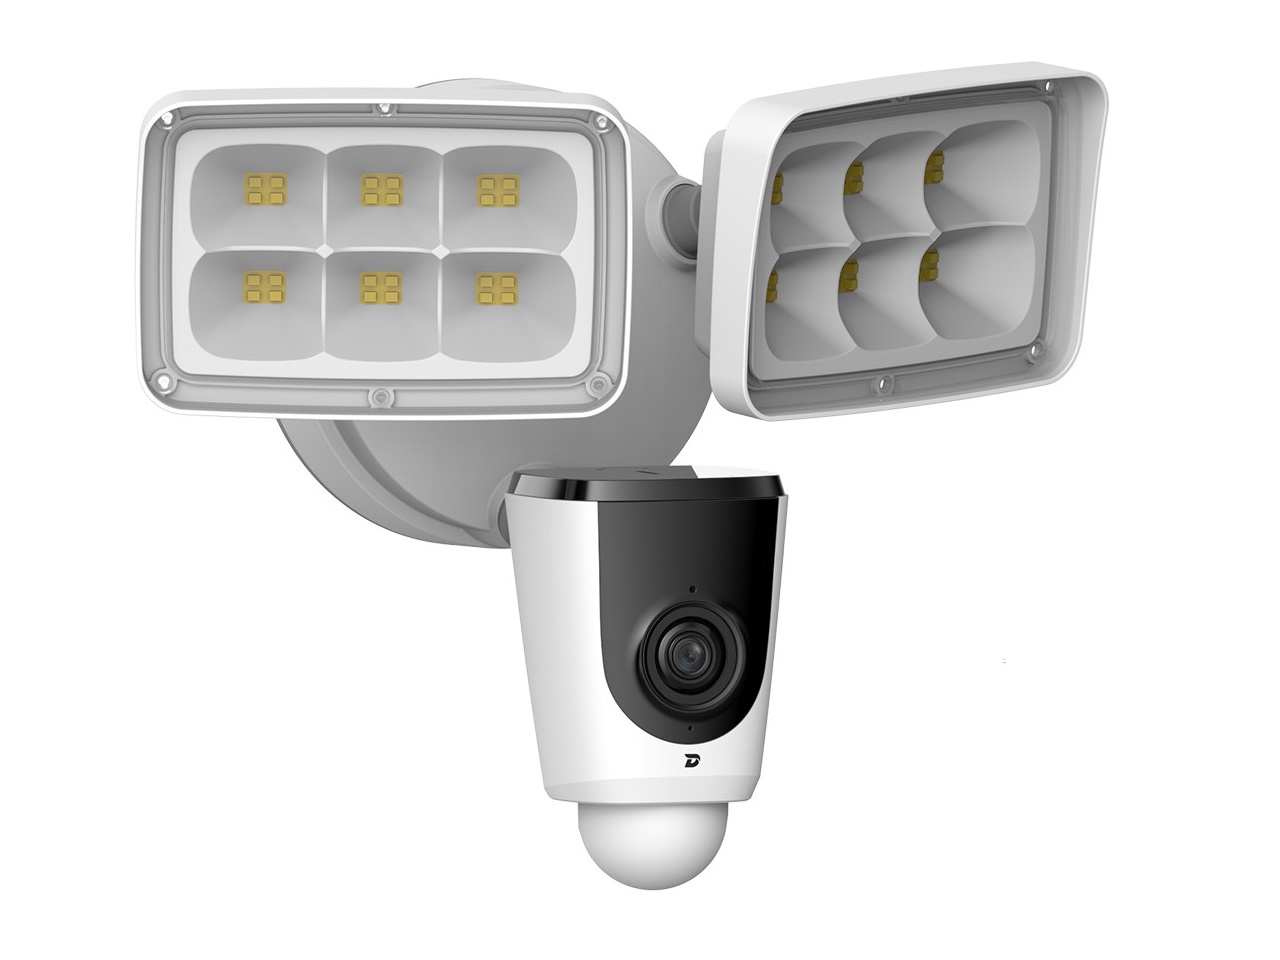 ICRealtime Flooder 2MP WiFi Outdoor Floodlight Camera/2.8mm Lens/33ft Night Vision/12VDC/Built-In Microphone and Speaker